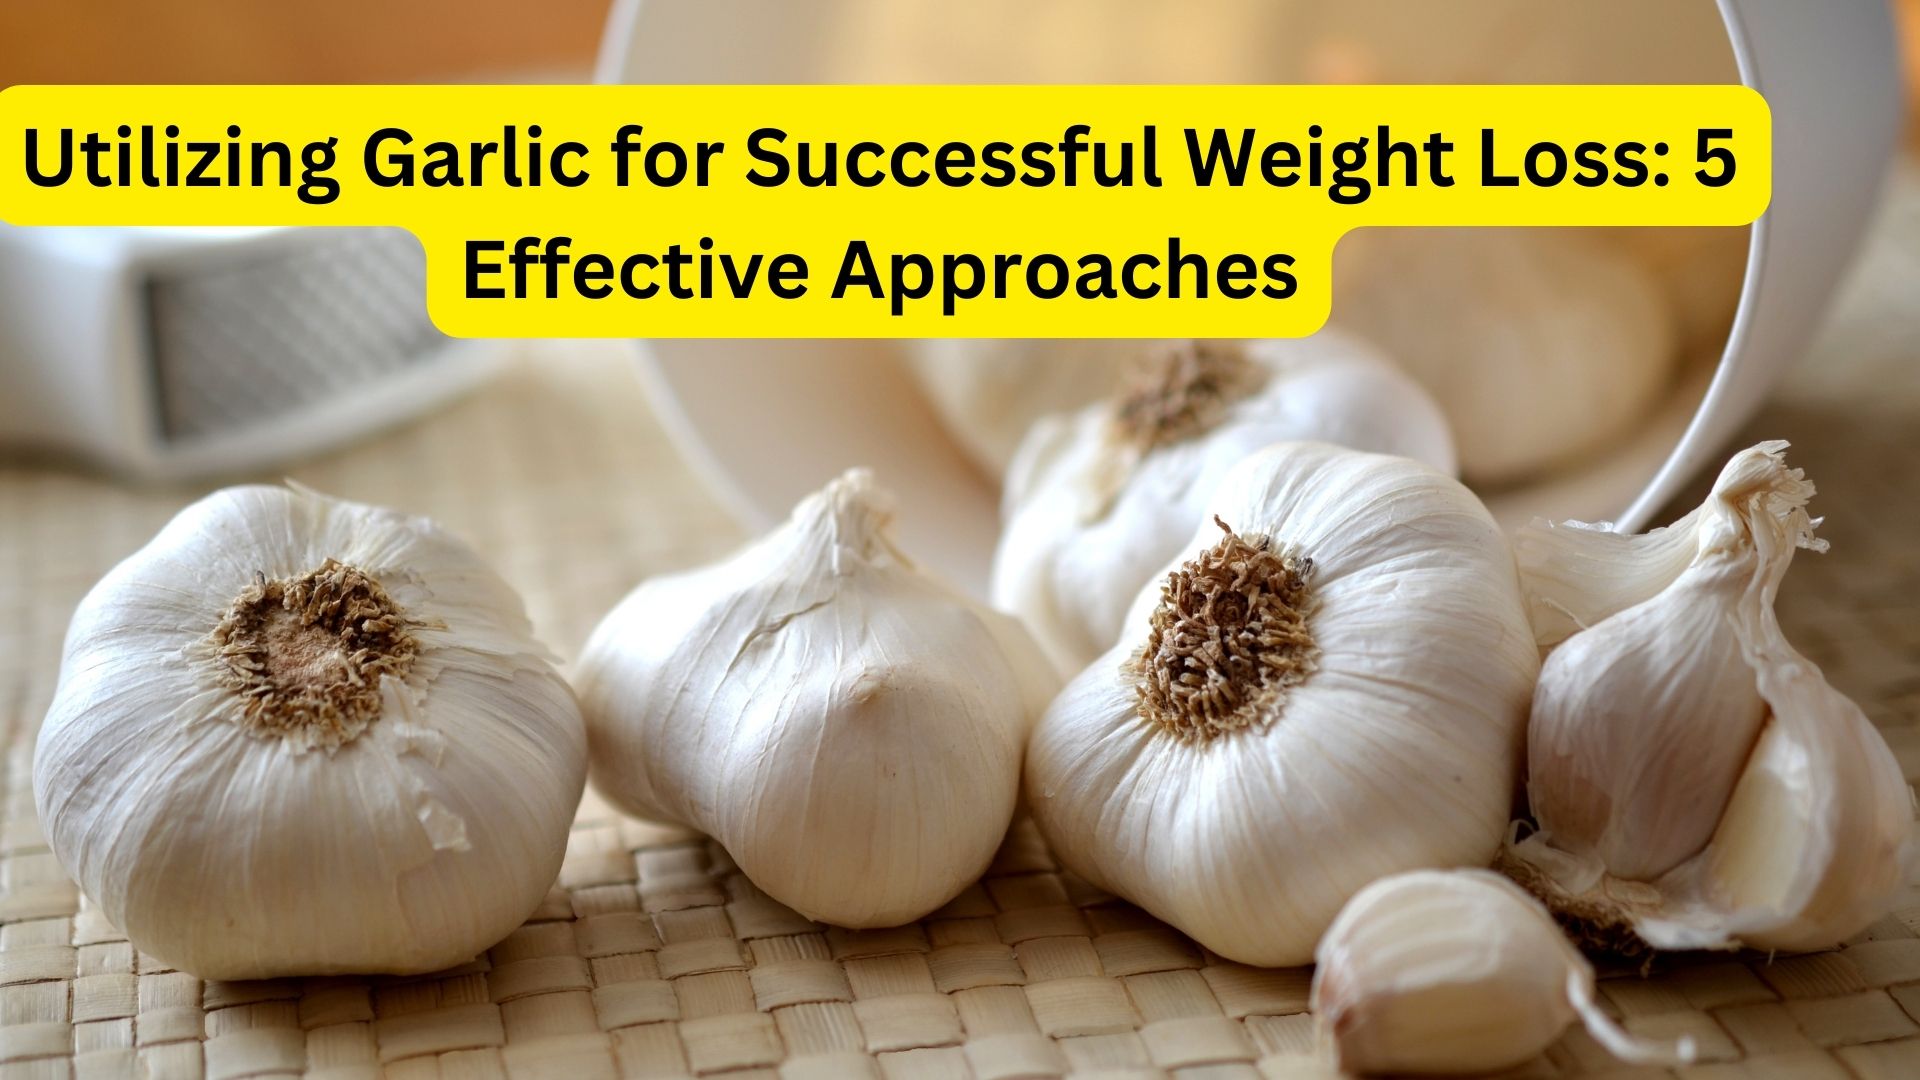 Utilizing Garlic for Successful Weight Loss: 5 Effective Approaches